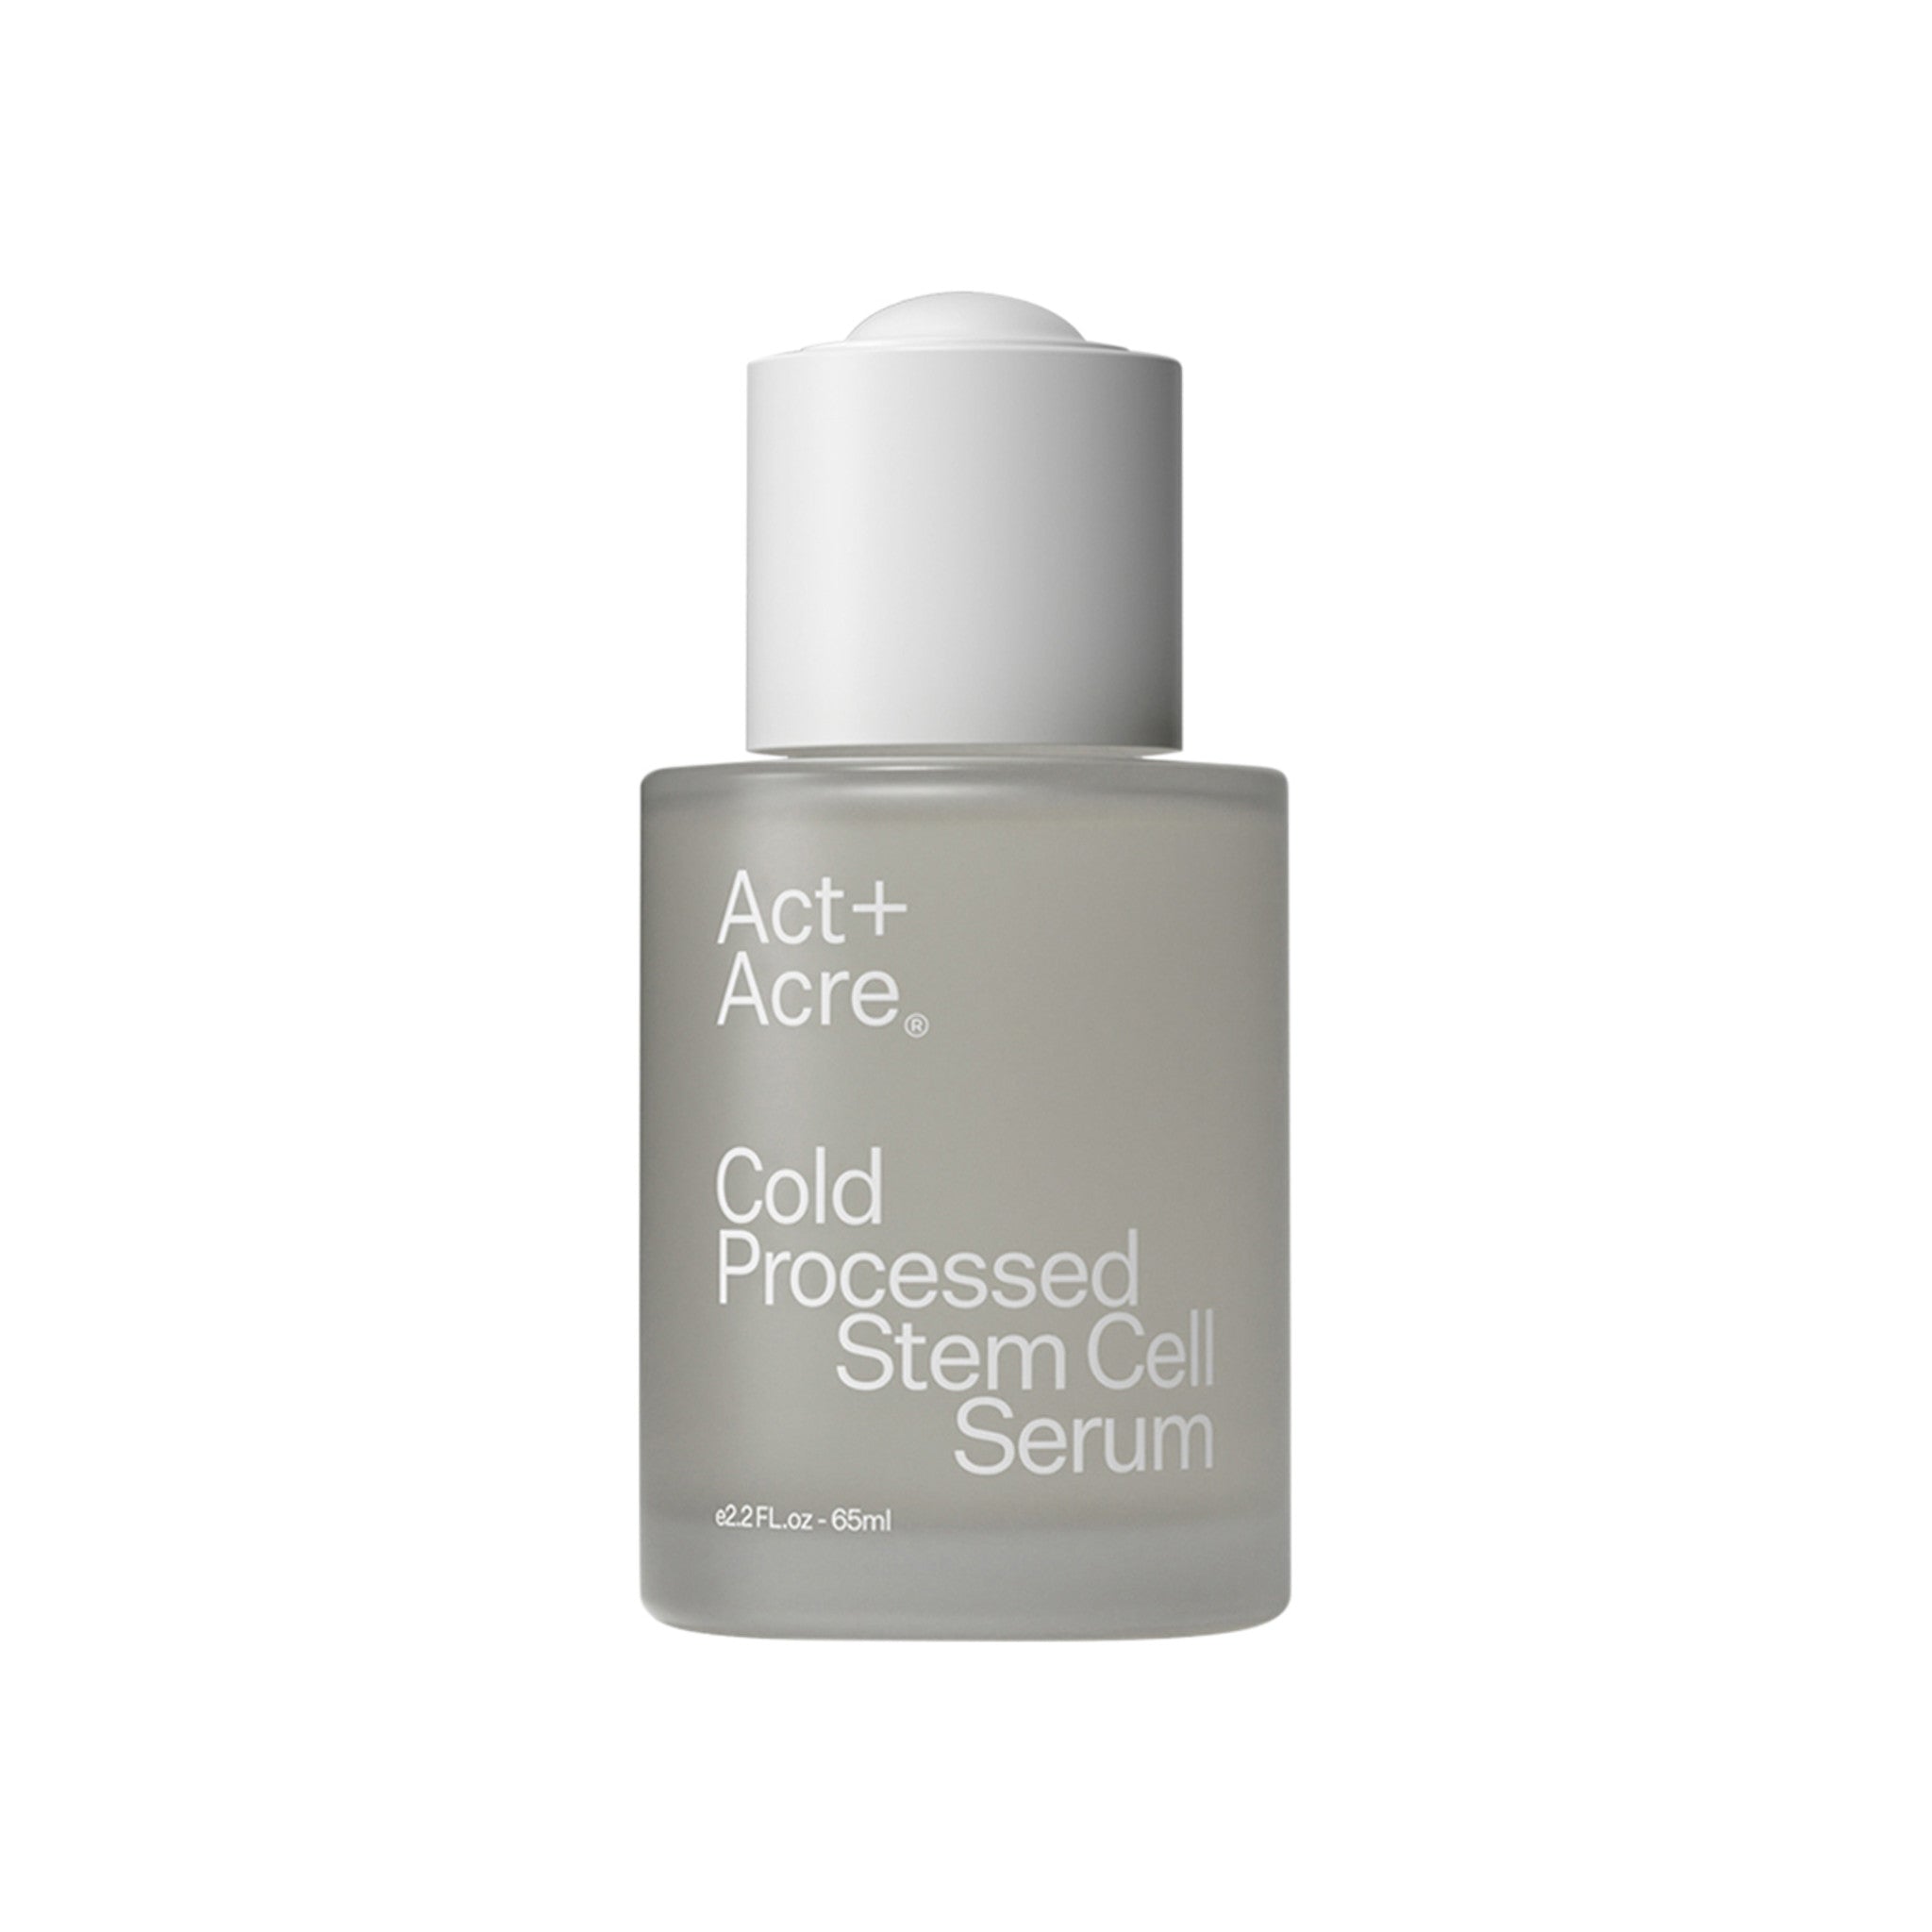 Act+Acre Cold Processed Stem Cell Serum main image.